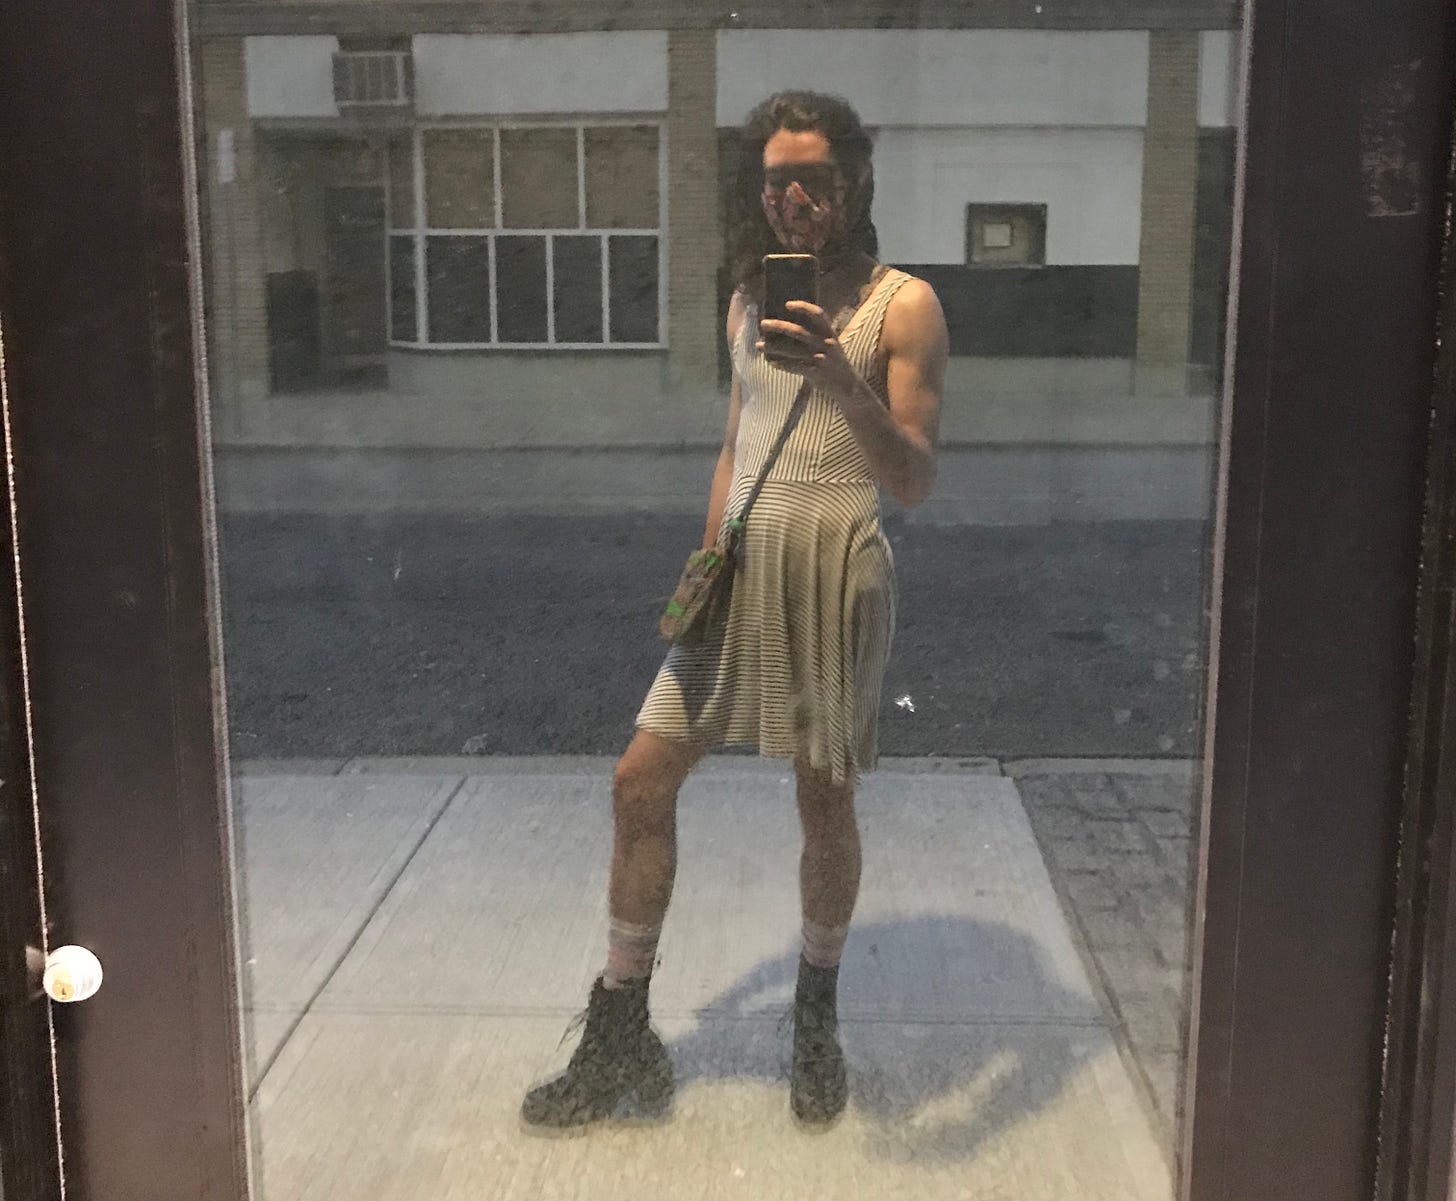 A somewhat blurry mirror-esque selfie taken in a very reflective glass door on an empty industrial-looking downtown Providence street. Nico stands in the middle, body cheated a bit to the side with one leg out, wearing a black and white striped dress that cuts off just above the knee. They have big Doc Martens on and high socks, a colorful satchel over one shoulder and a dark face mask. They raise on arm in front of them, muscles lightly flexed, to hold the phone taking the picture. Their long hair is swept over to one side, their face mostly obscured as they look down at the screen.